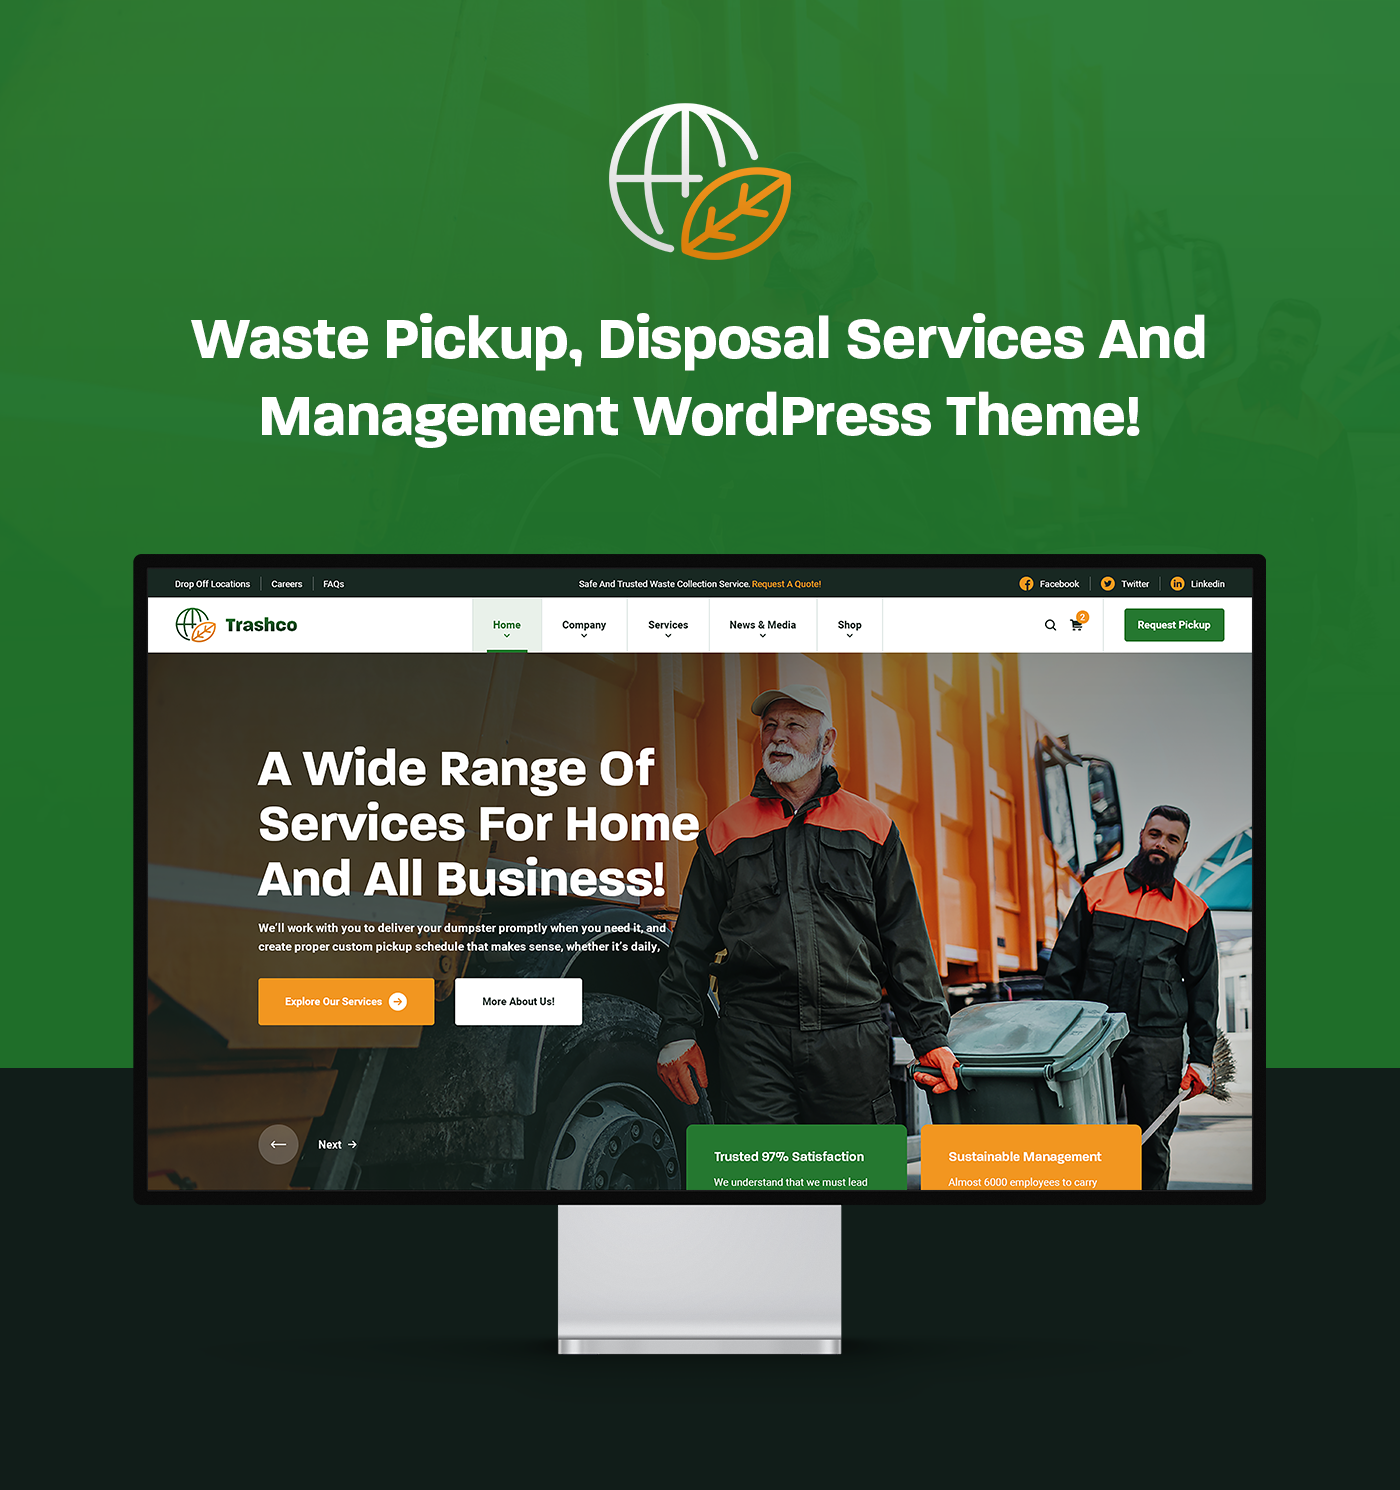 dumpster rental eco friendly environmental recycling Solar energy disposal services Garbage Pickup home waste recycling services TRASH PICKUP